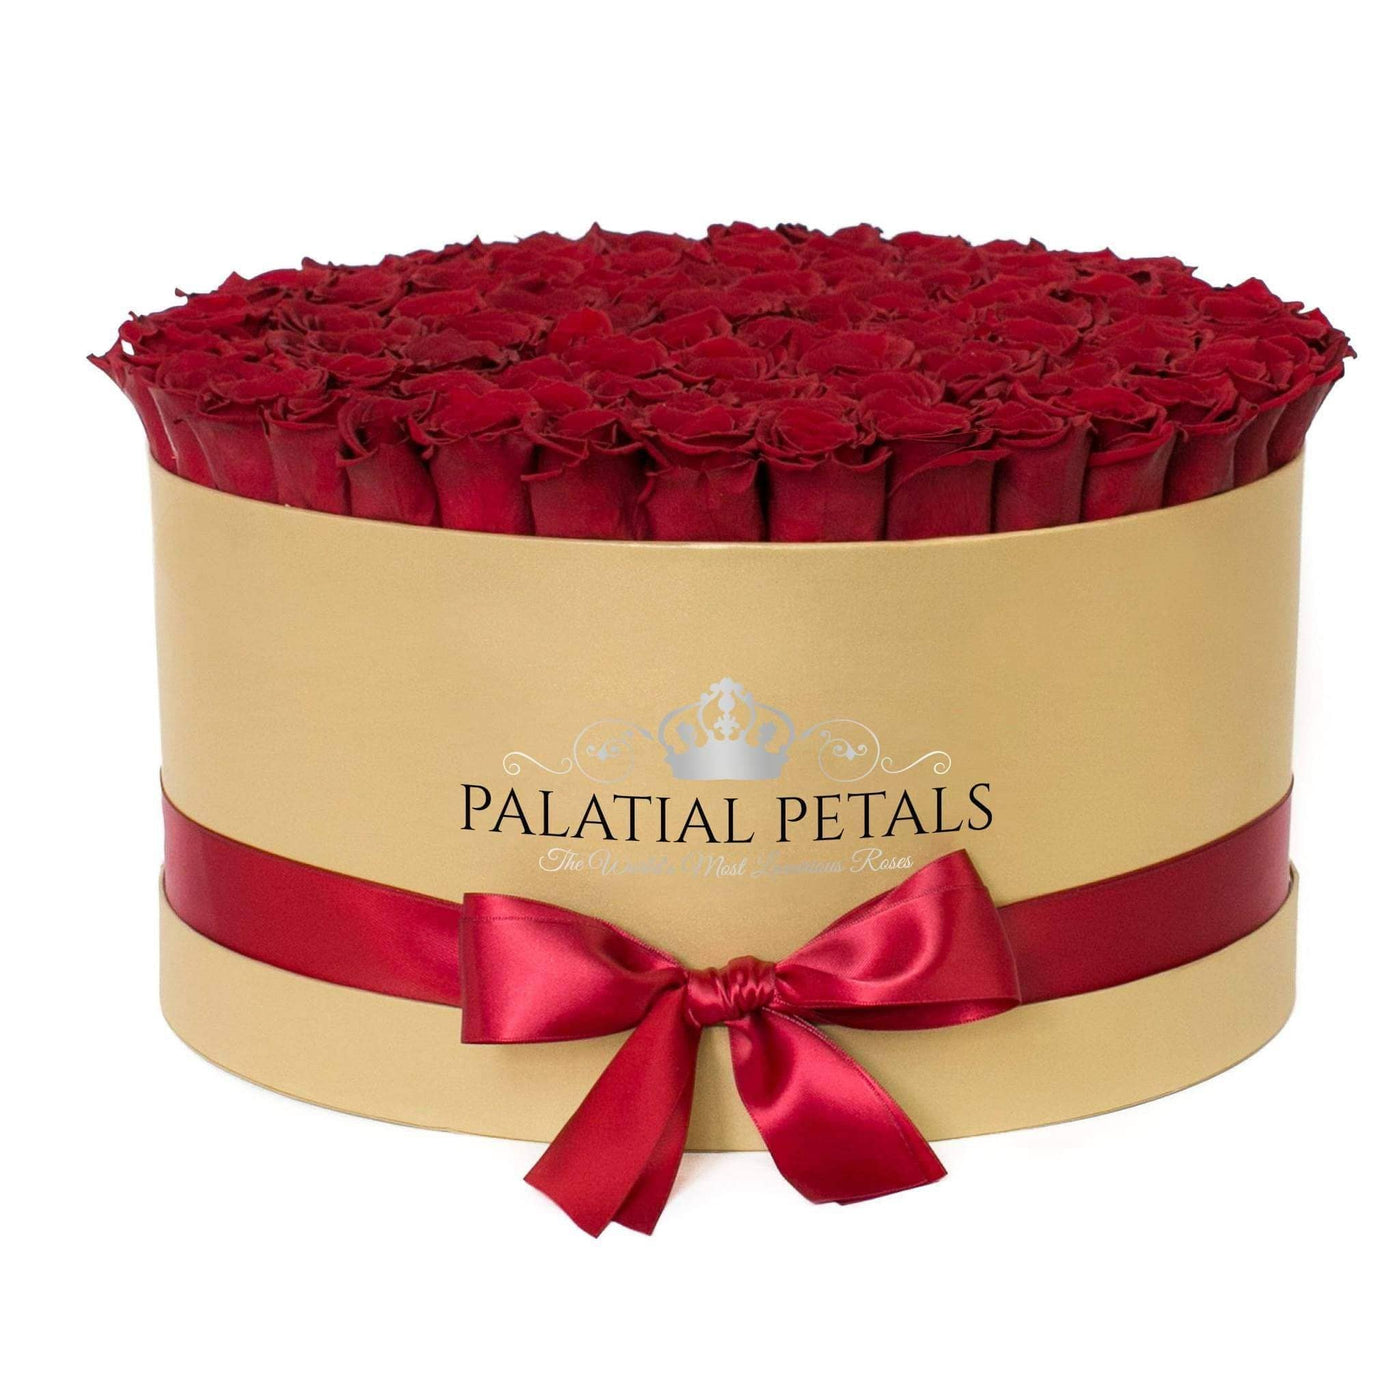 Red Roses That Last A Year - Deluxe Rose Box